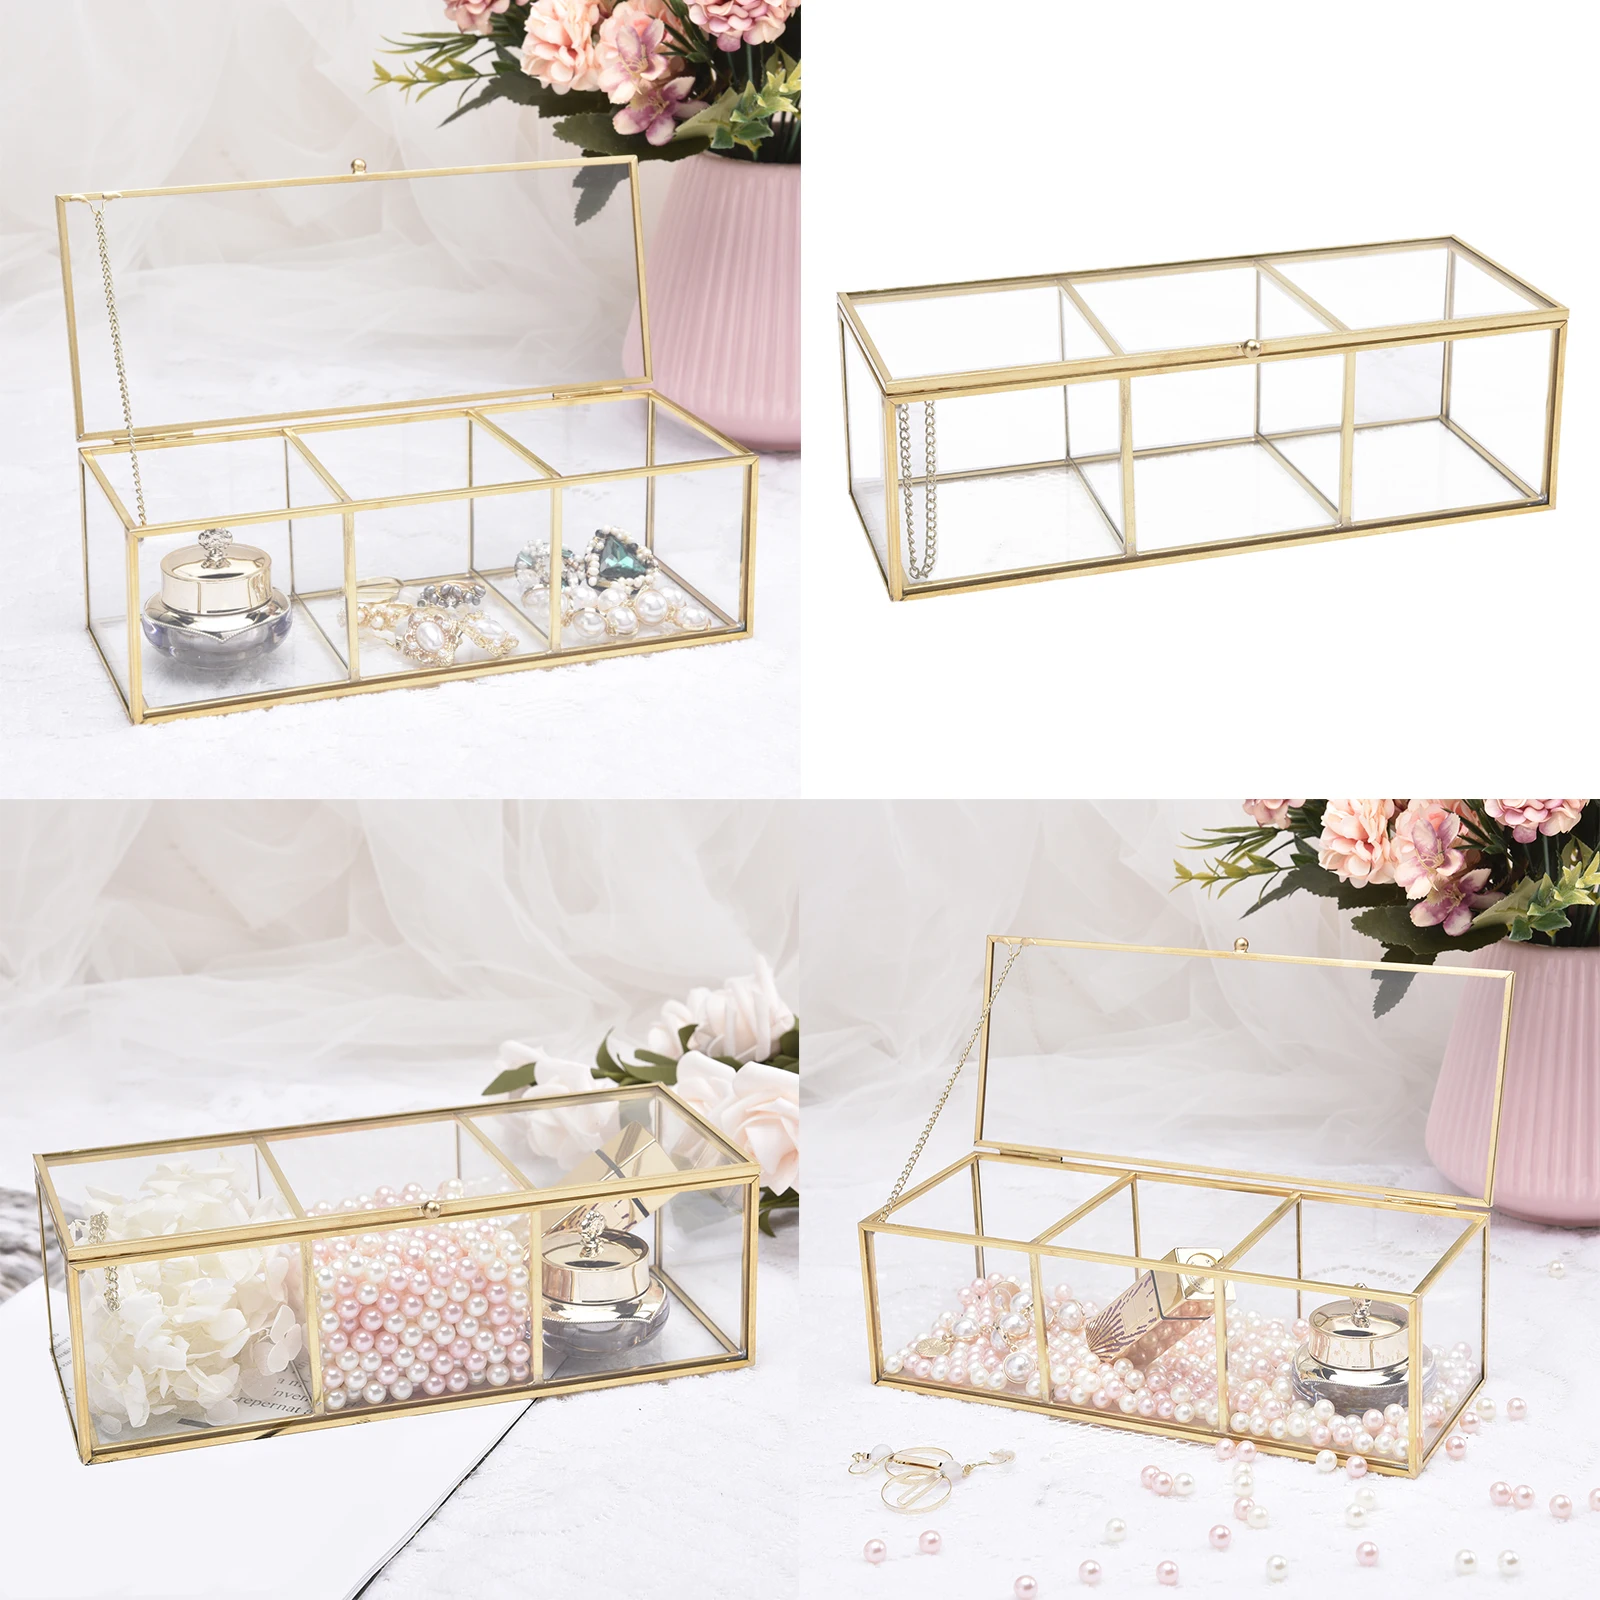 Clear Glass Makeup Organizer Tray, 3 Spaces Cosmetic Display Case Storage Box for Lipstick,Makeup Brushes and Skin Care Bottles